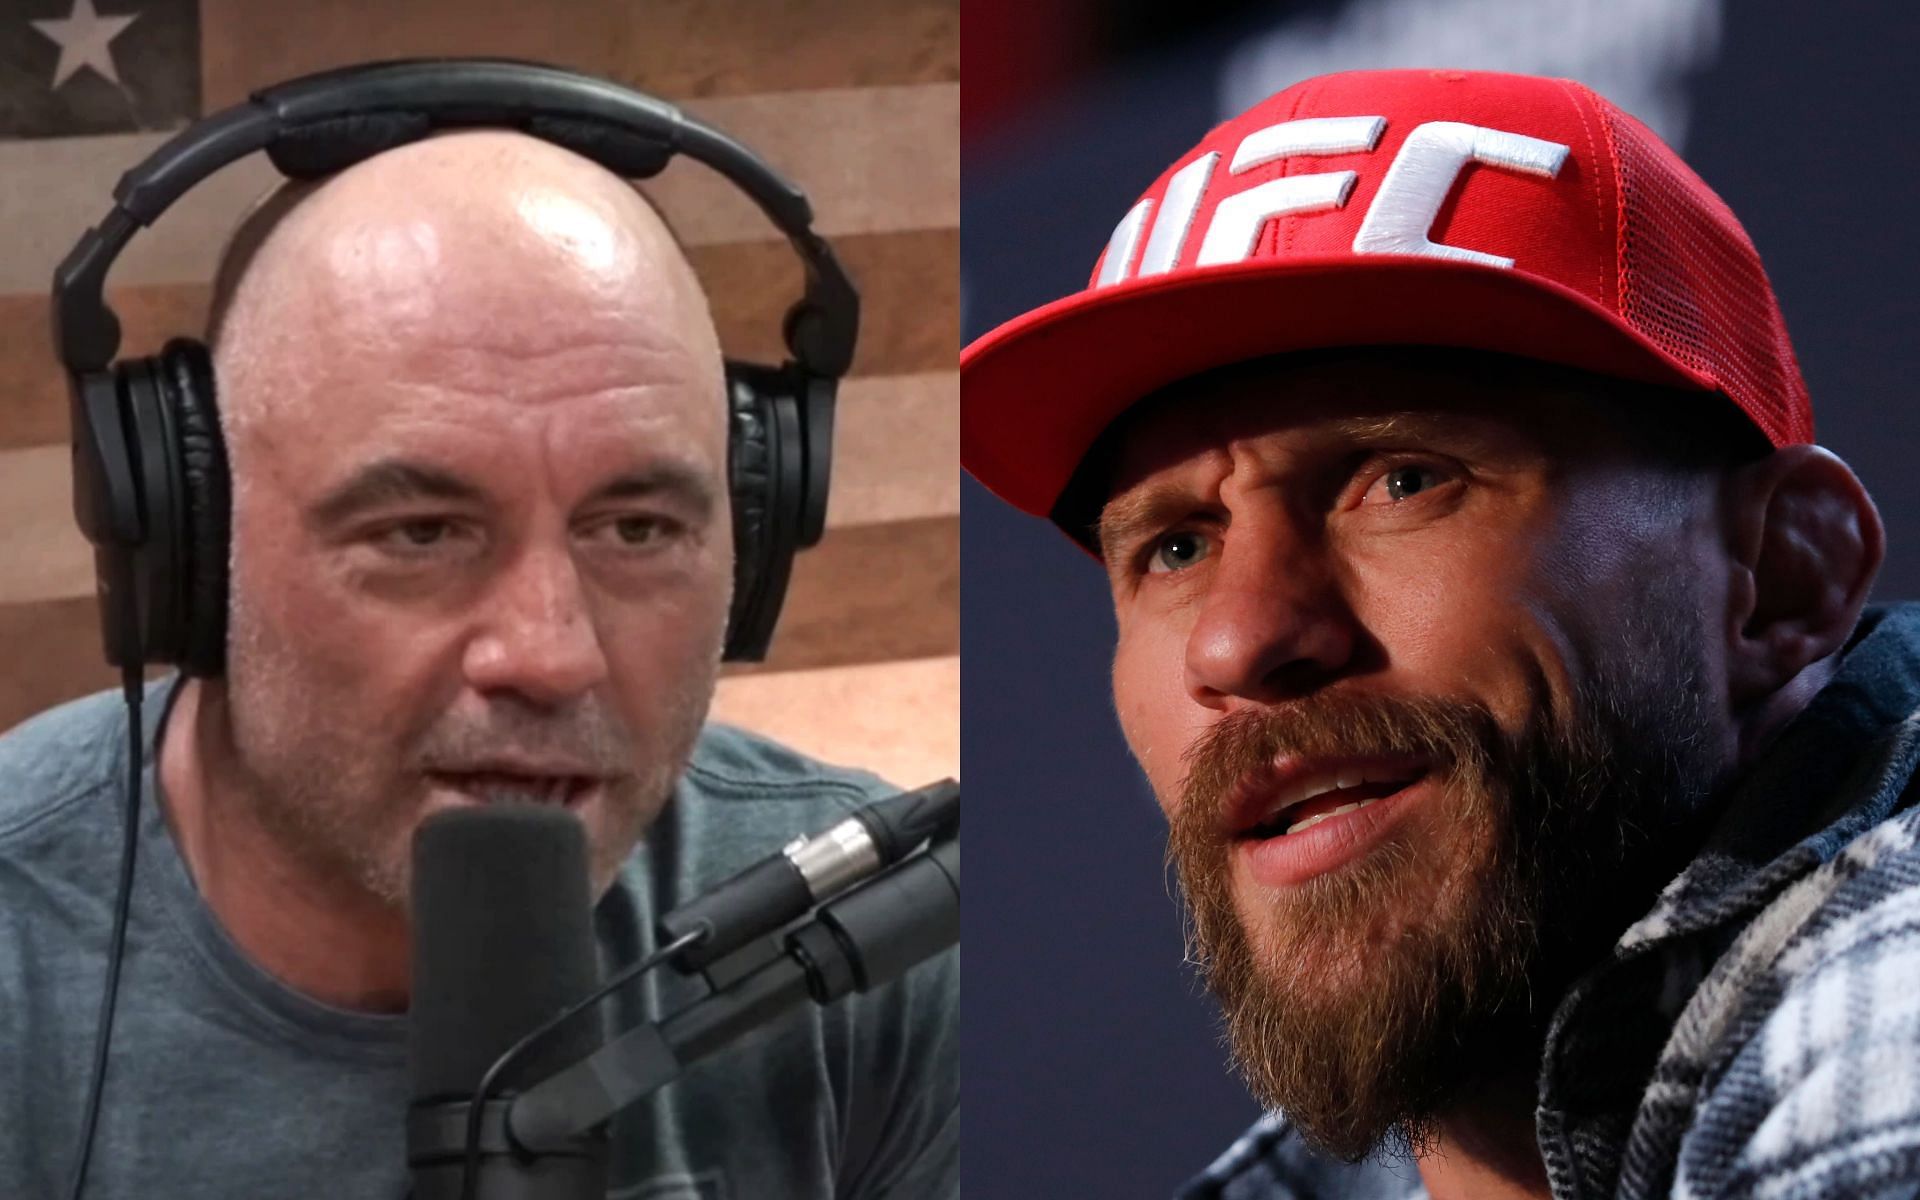 Joe Rogan (left) and Donald Cerrone (right) (Images via YouTube / JREClips and Getty)